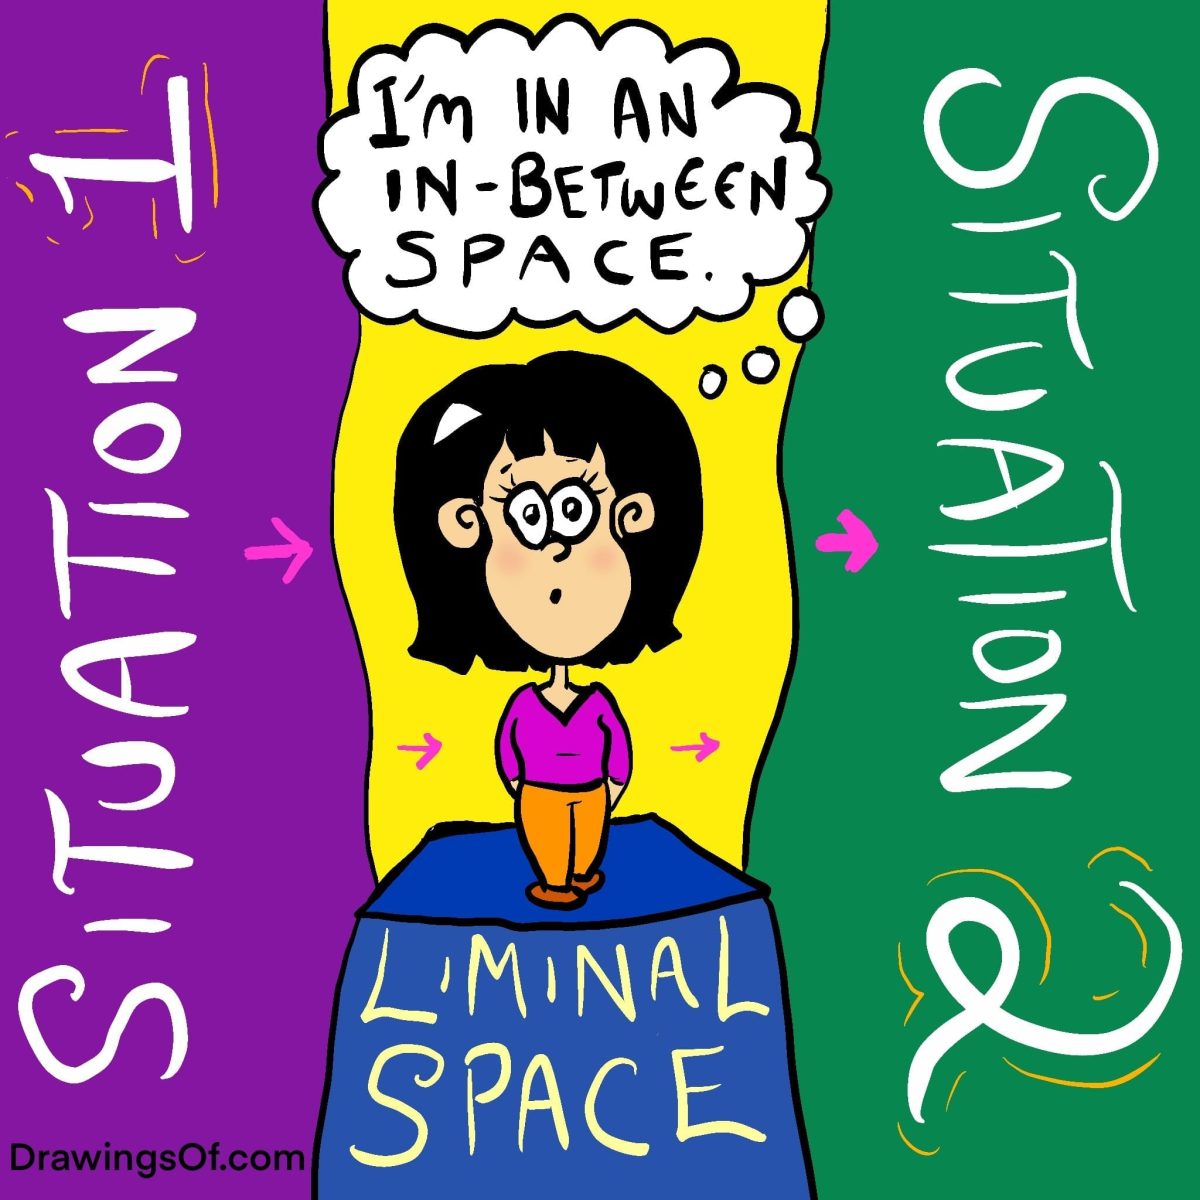 Liminal space definition cartoon lesson about being between situations.